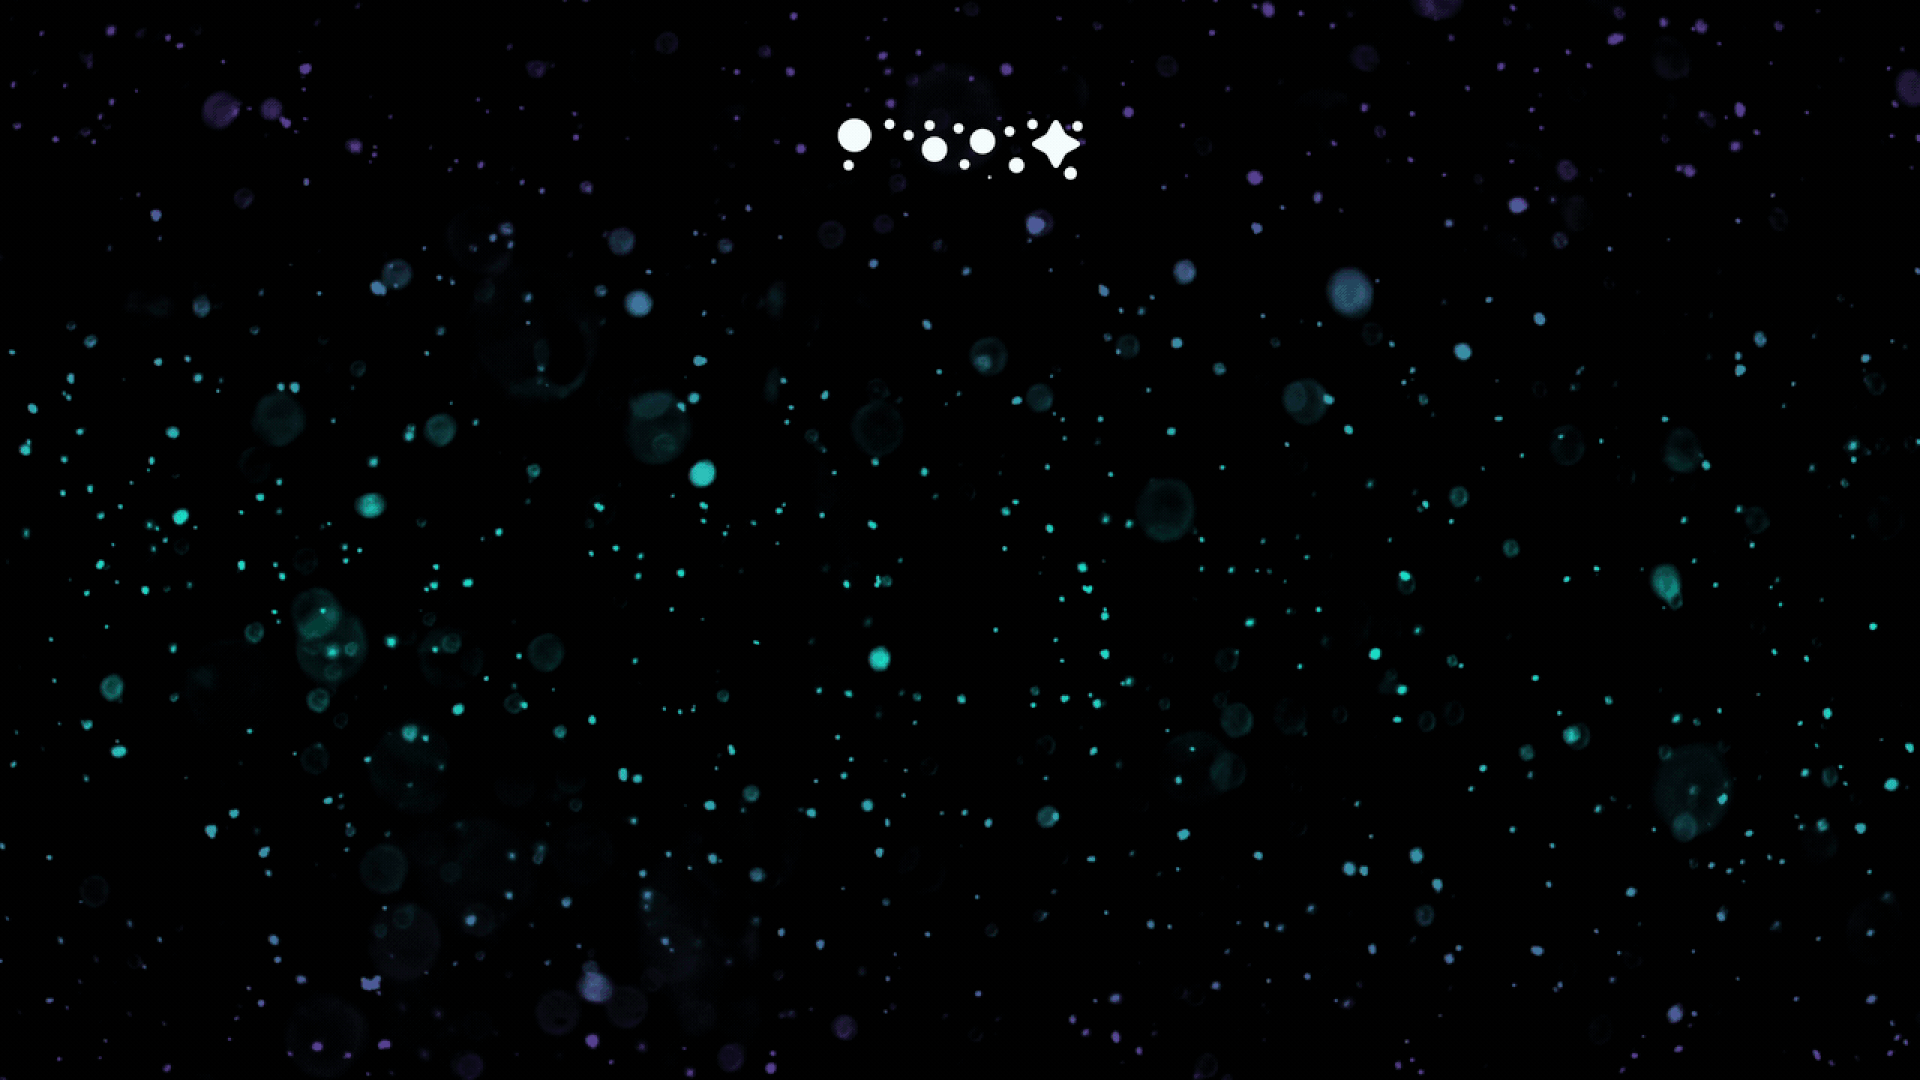 Illustration of an exclamation point made of stars.